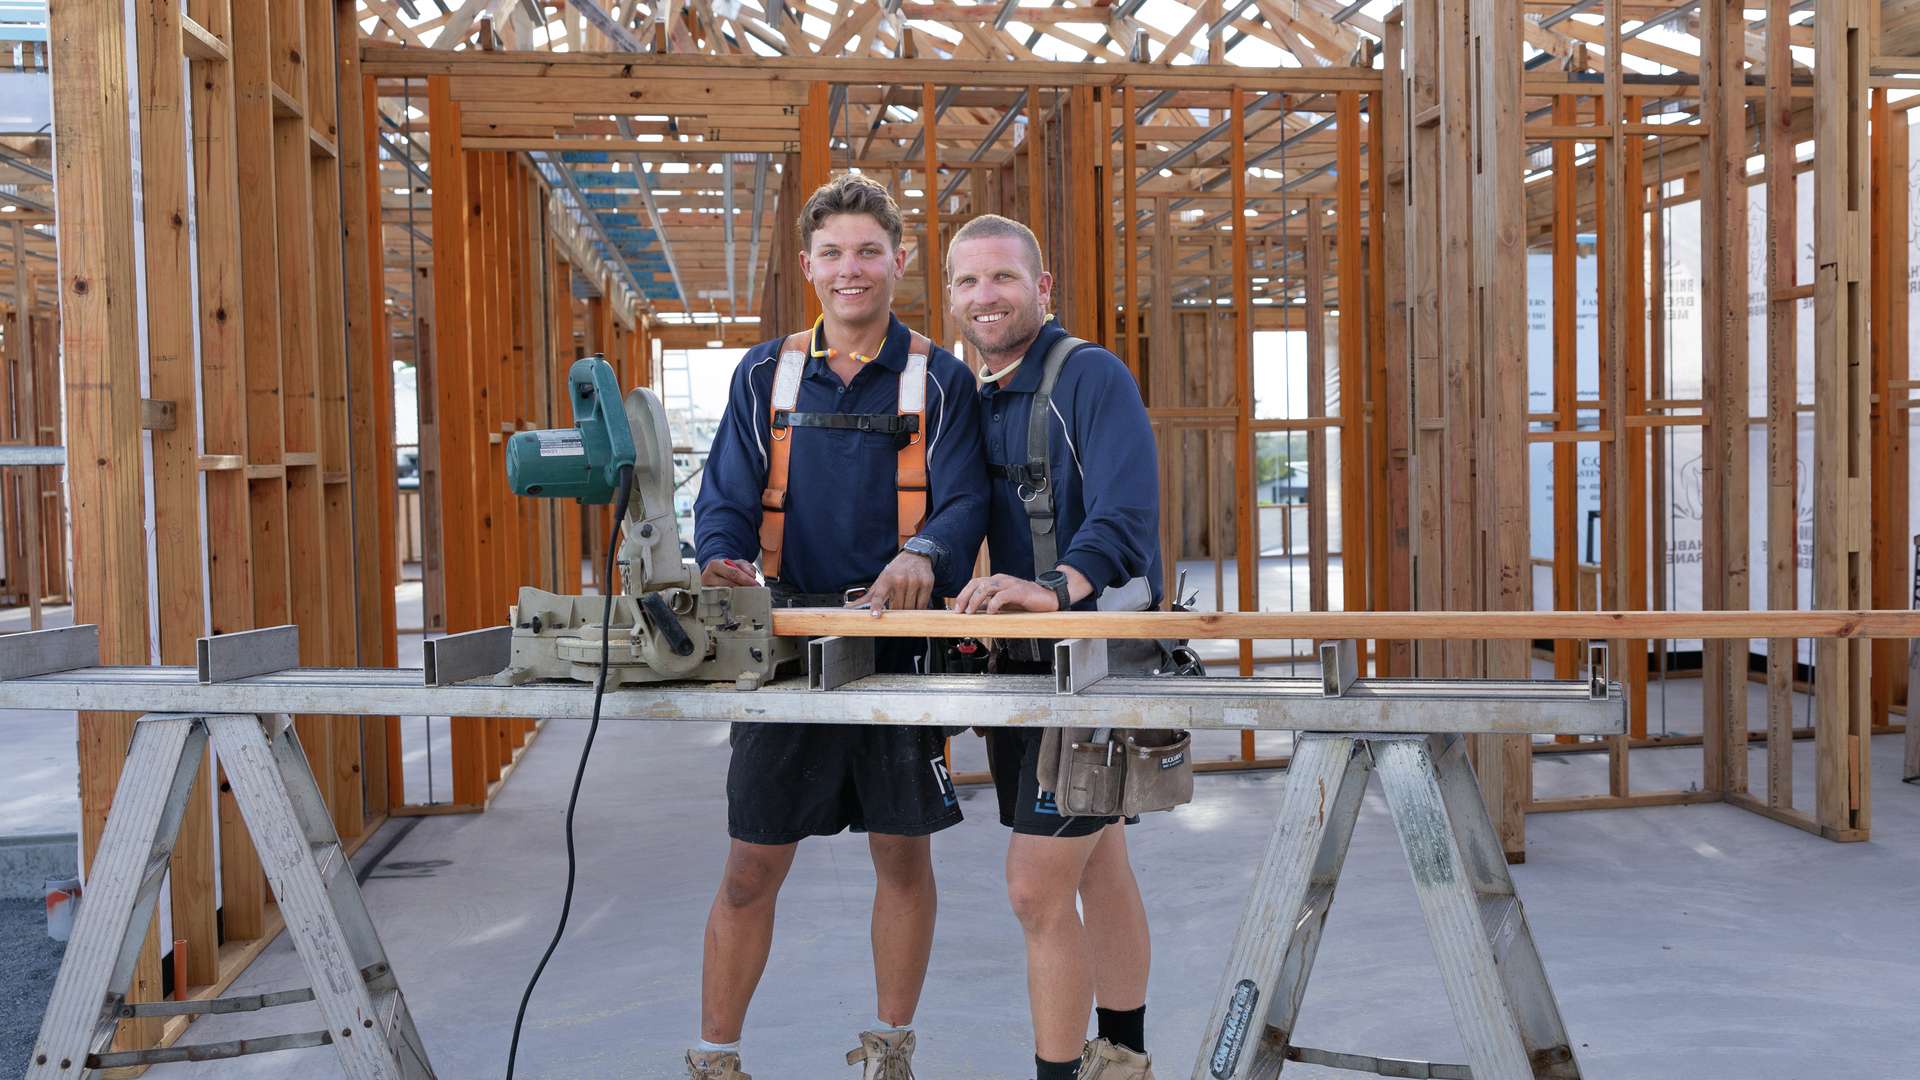 A CQU TAFE Construction student learns the tools with his builder overseeing his work on a job. They are standing in a house under construction.